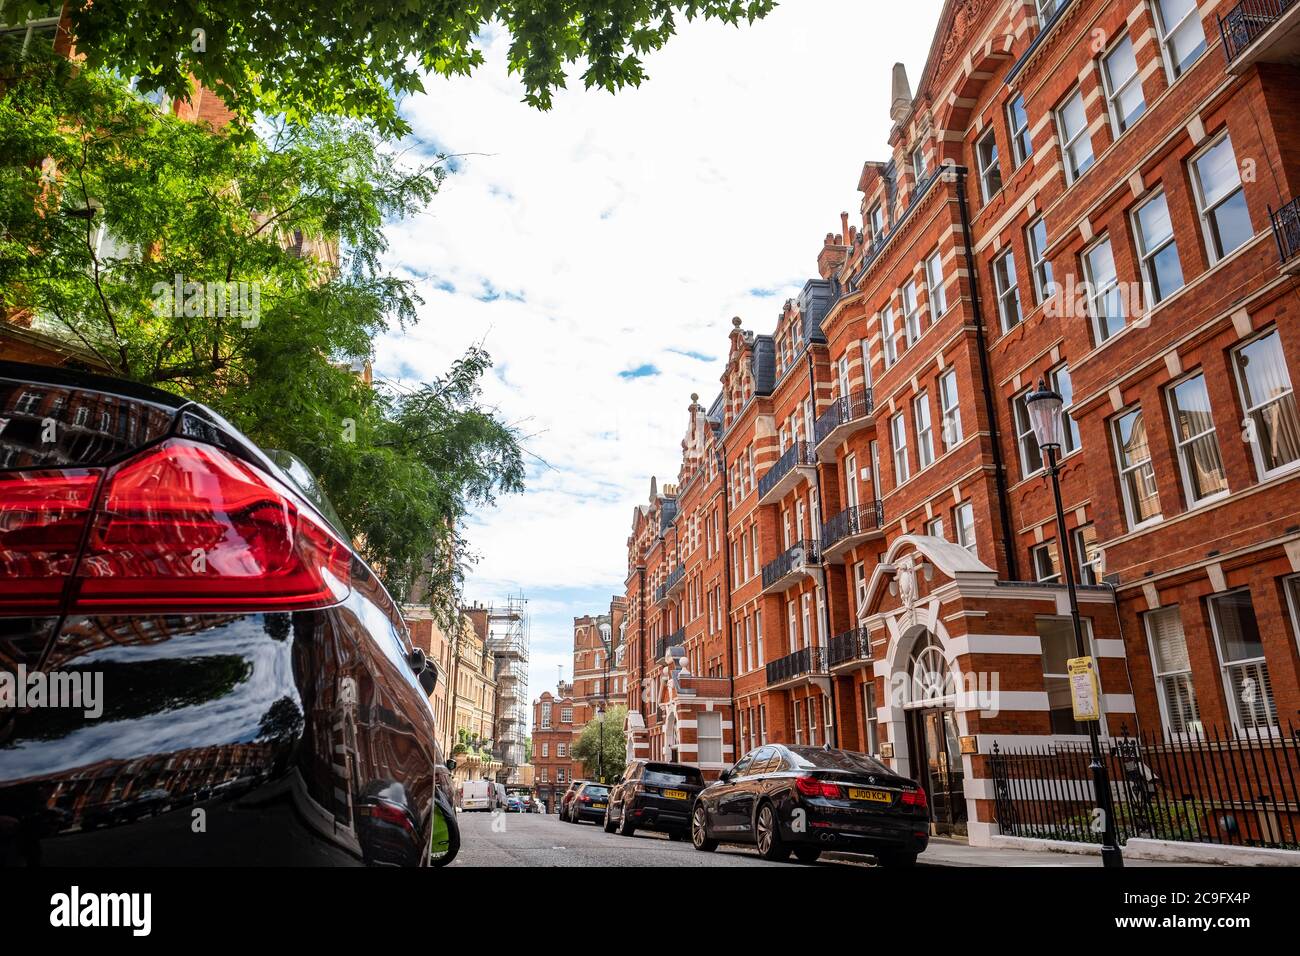 London, July, 2020: Residential street of beautiful red brick terraced London townhouses in Kensington Court, west London Stock Photo